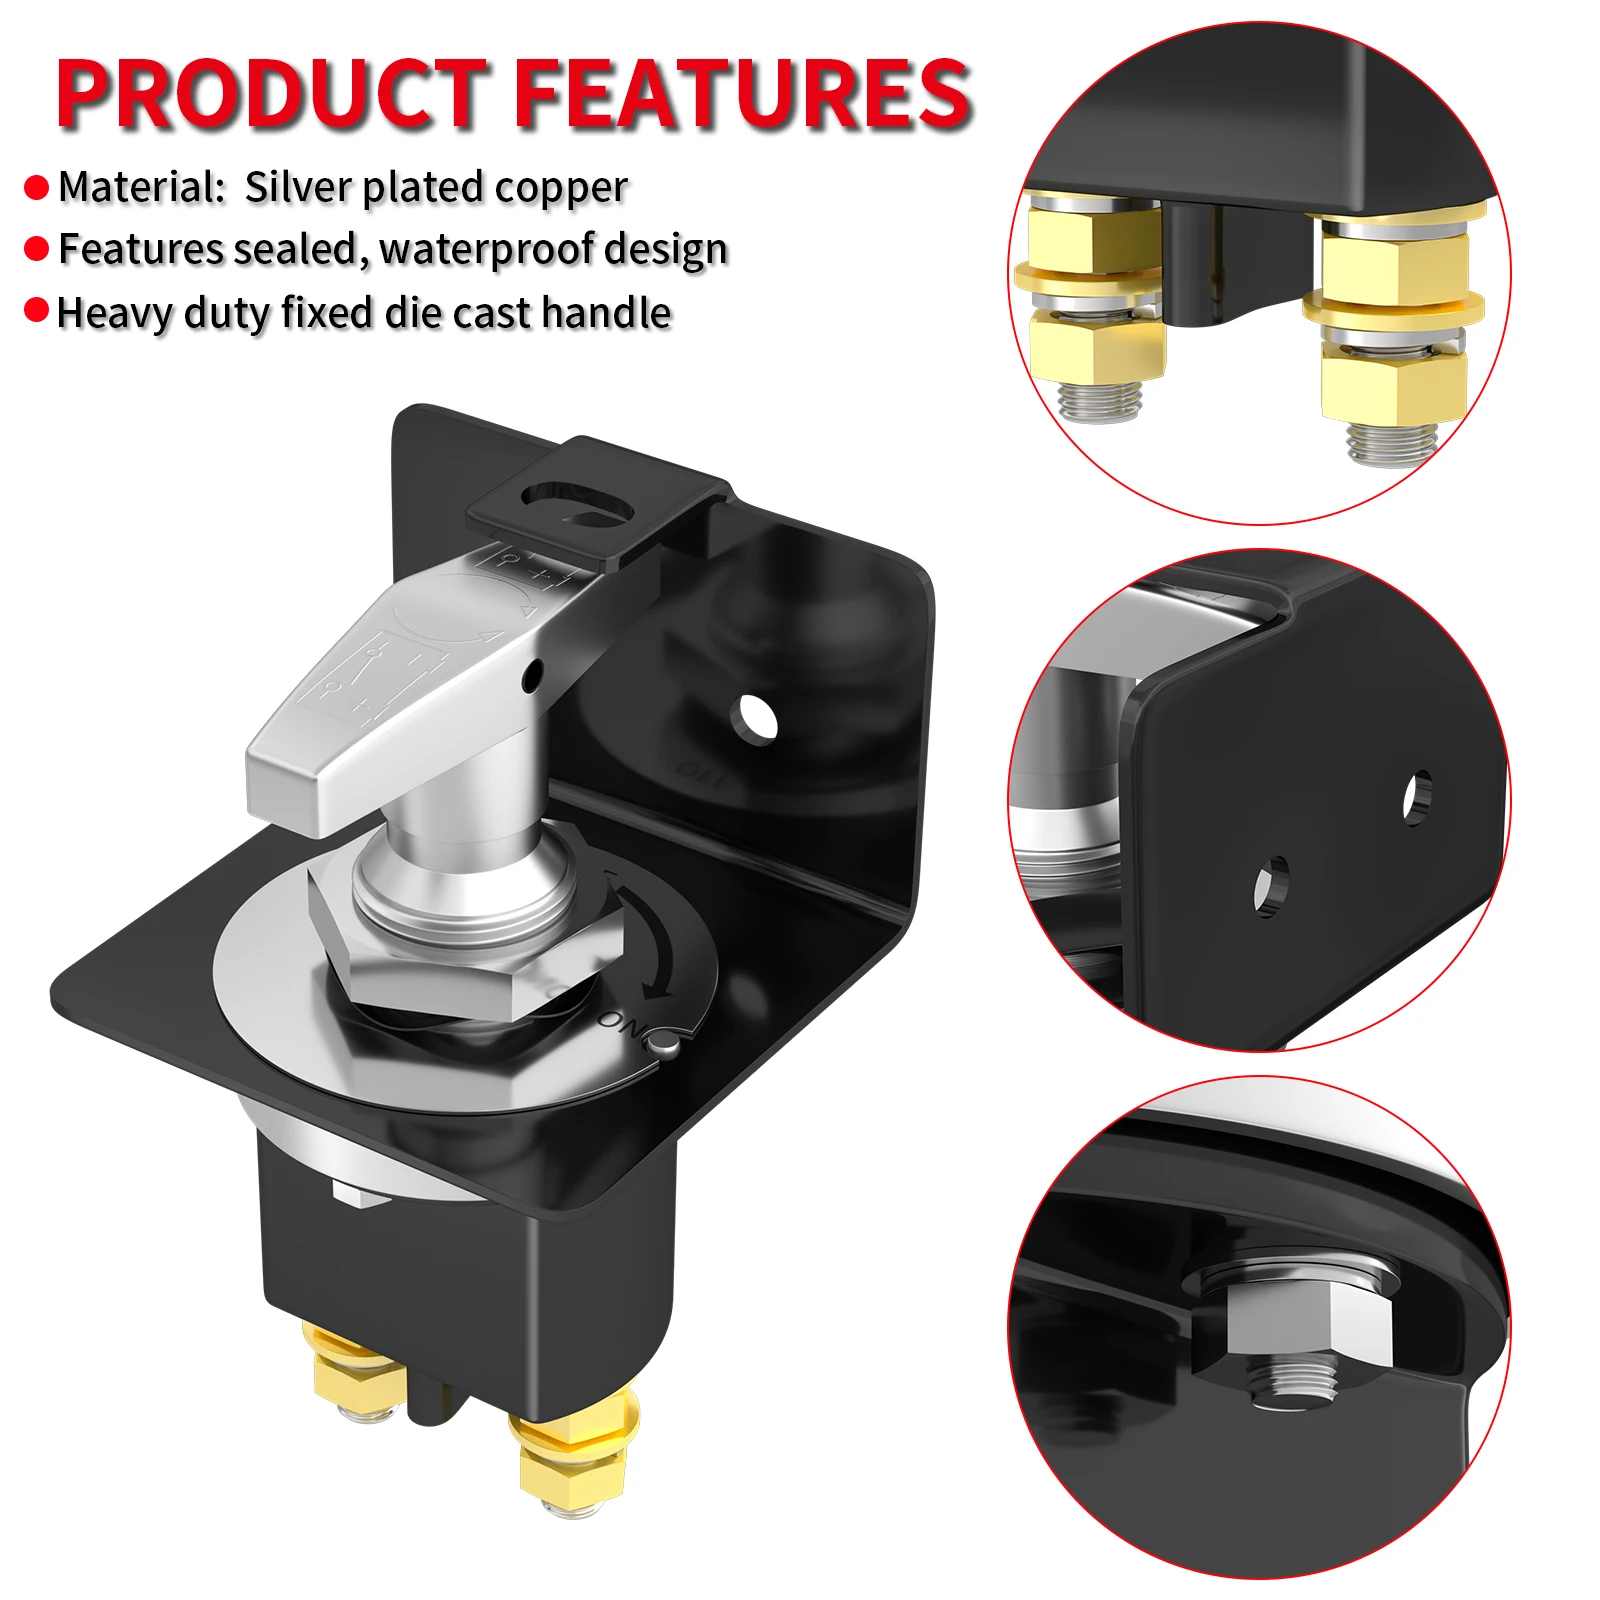 Battery Master Isolator Cut OFF Kill Switch Handles Automatic Battery Disconnect Switch With Lock-Out Plate For Car RV Boat